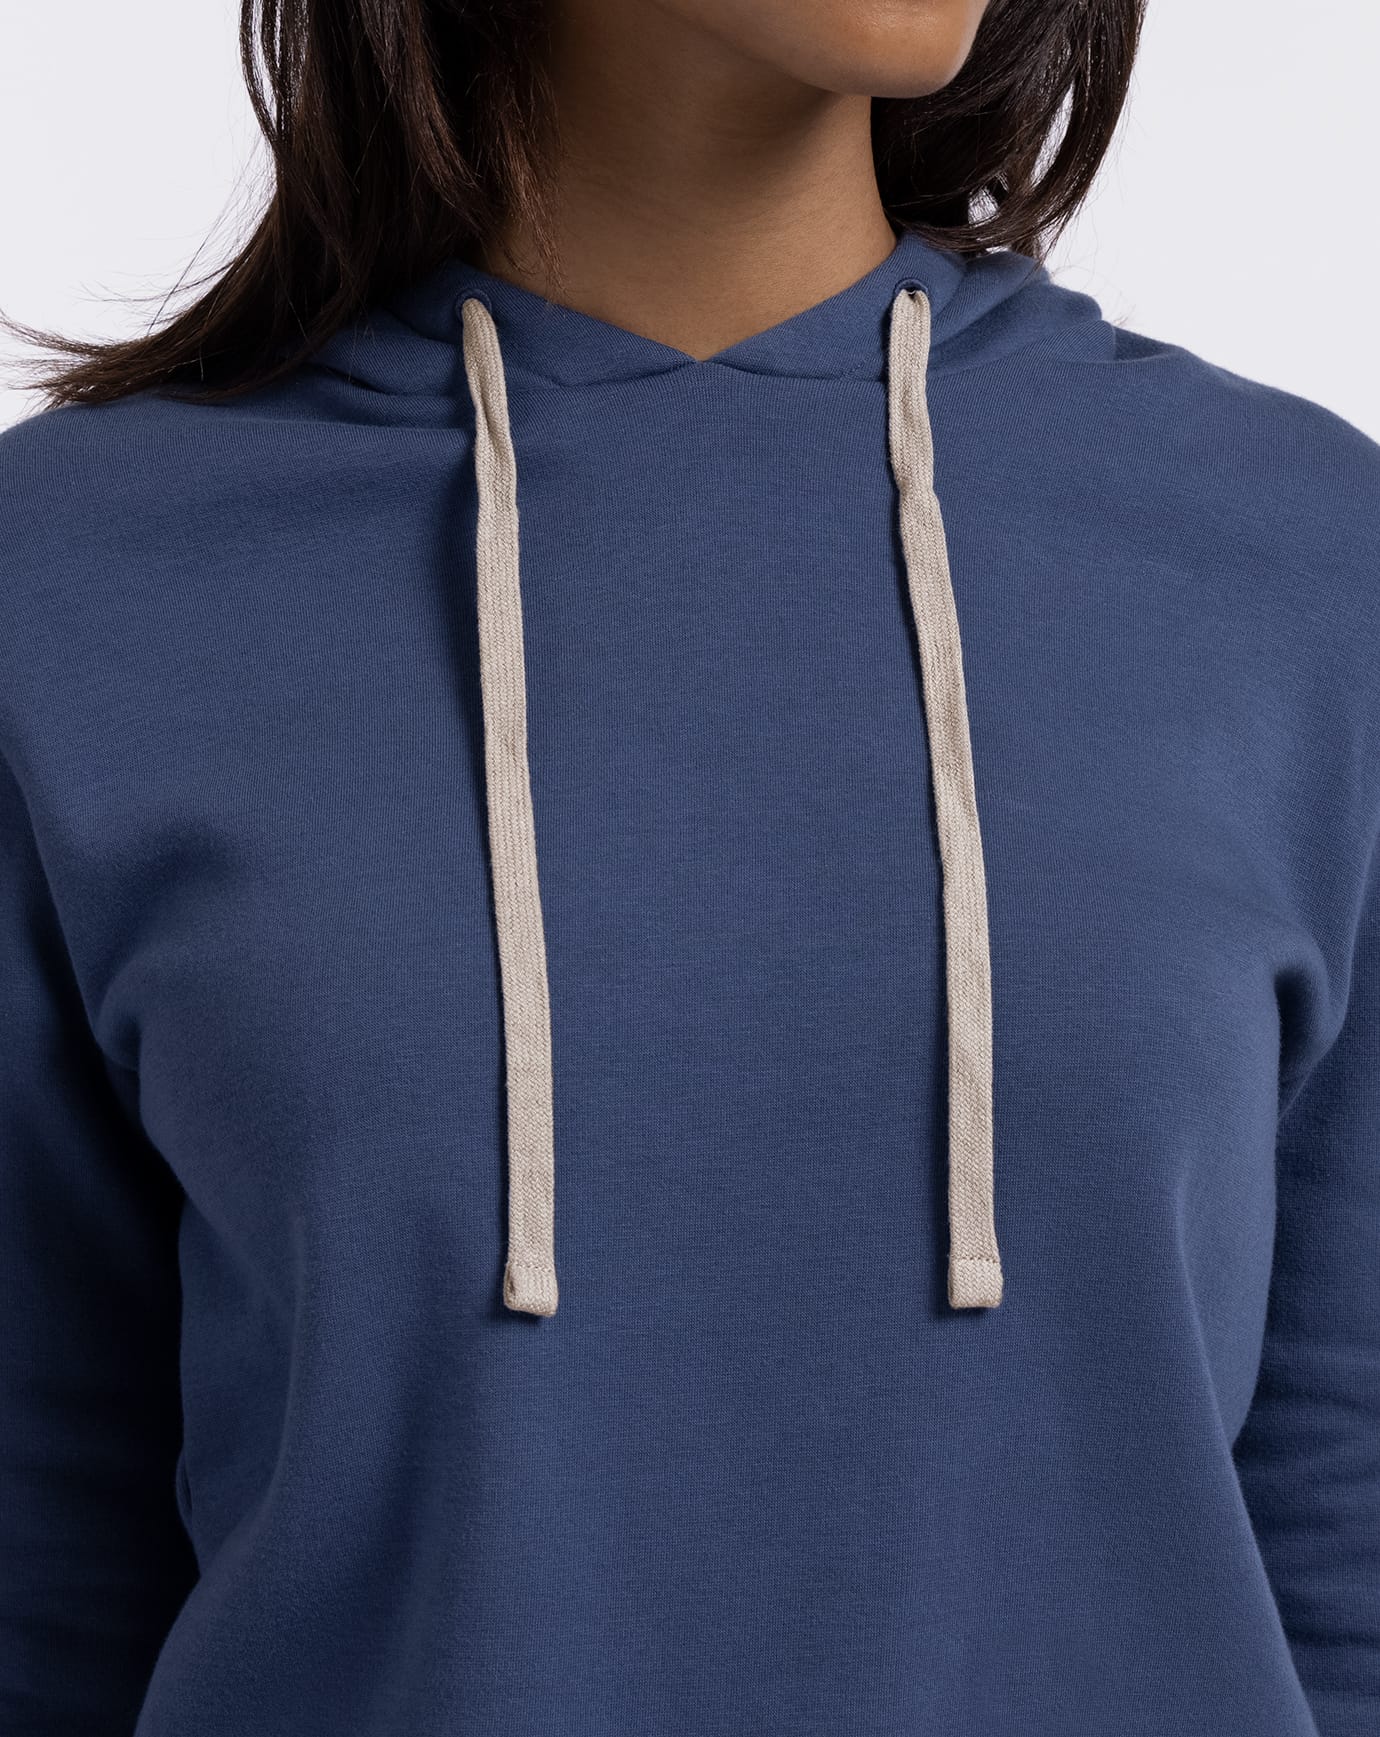 Women's Active Casual Thin Cotton Pullover Hoodie, Navy M, 1 Count, 1 Pack  